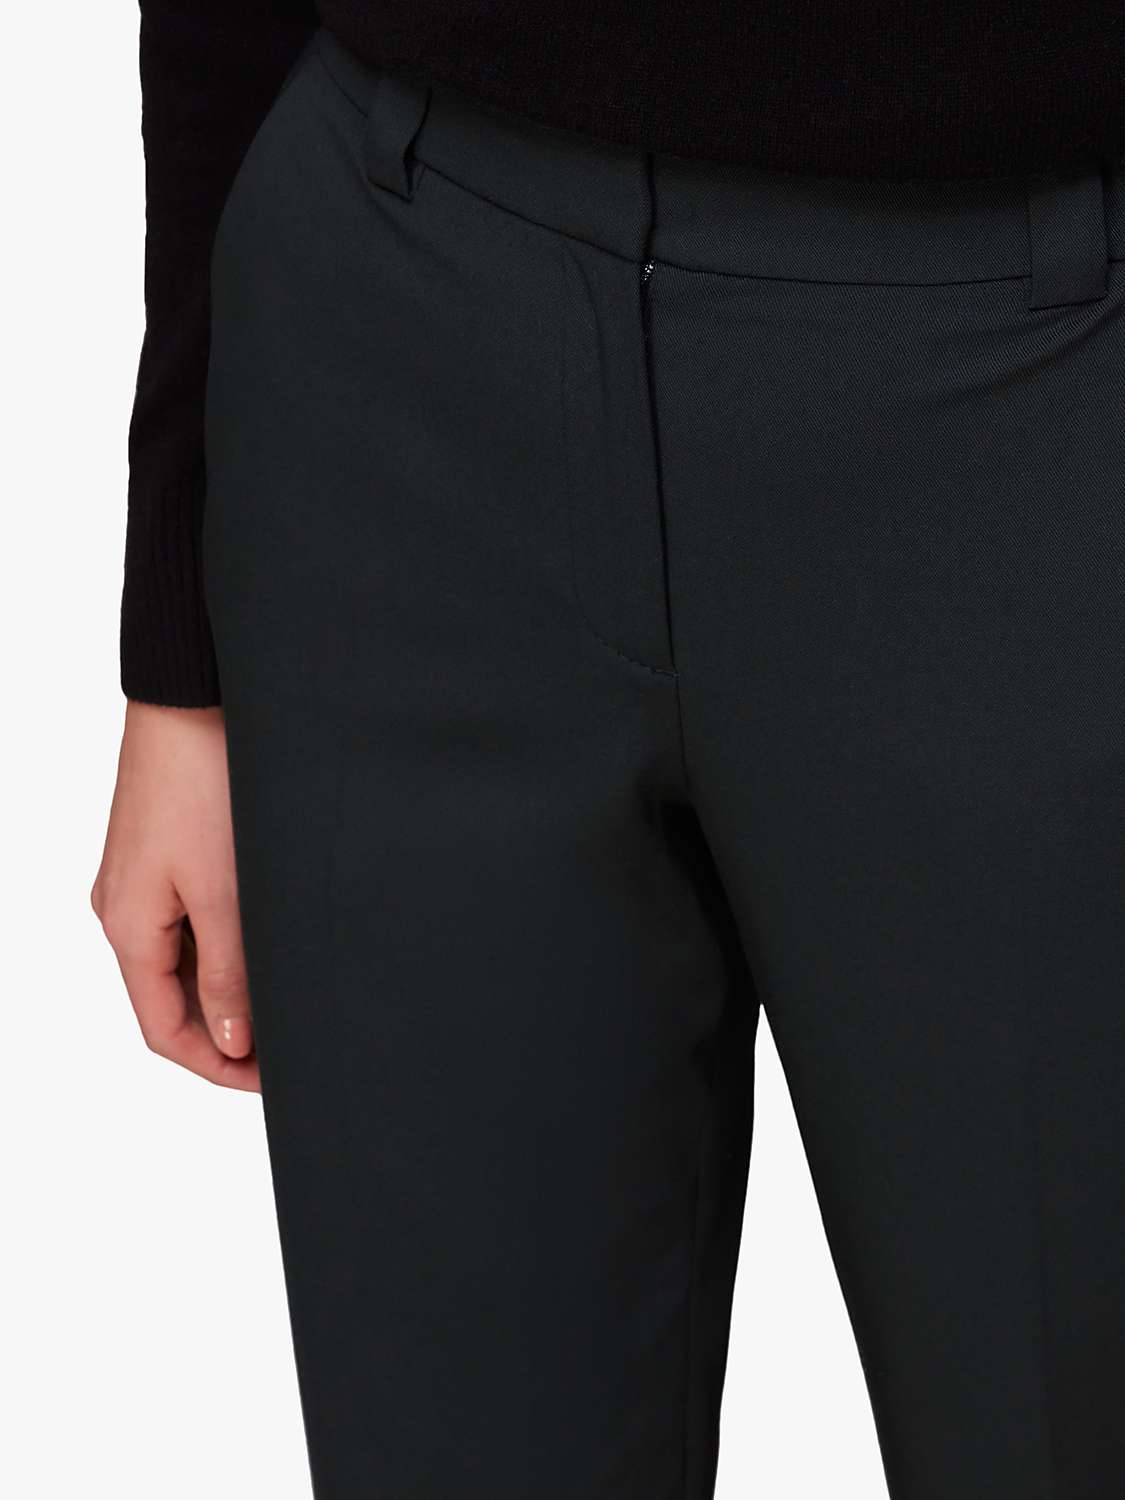 Buy Whistles Lucie Cigarette Wool Blend Trousers, Black Online at johnlewis.com